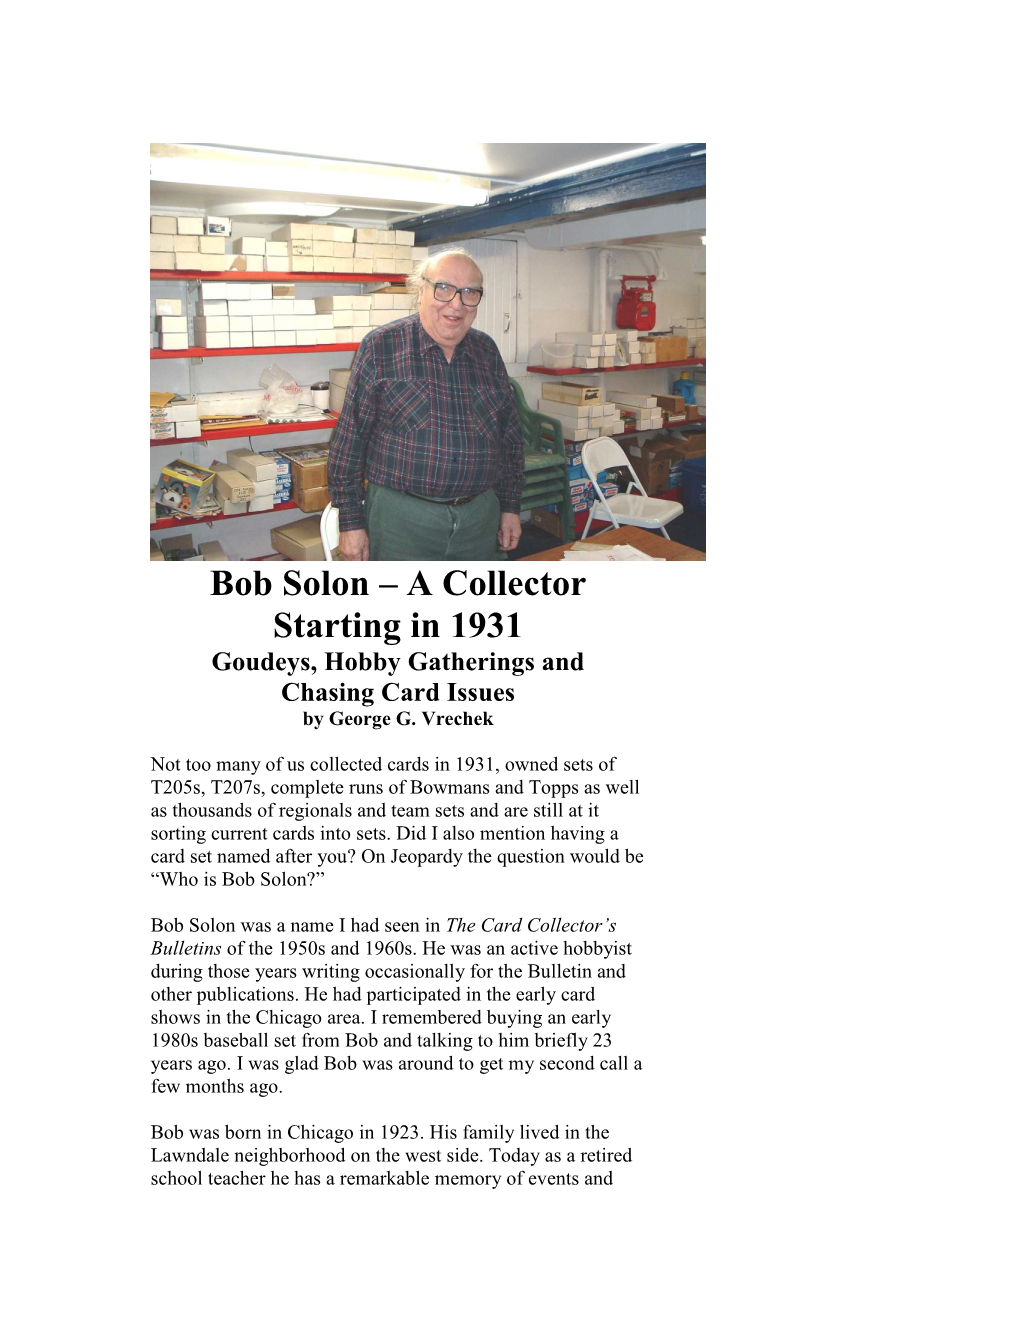 Bob Solon – a Collector Starting in 1931 Goudeys, Hobby Gatherings and Chasing Card Issues by George G